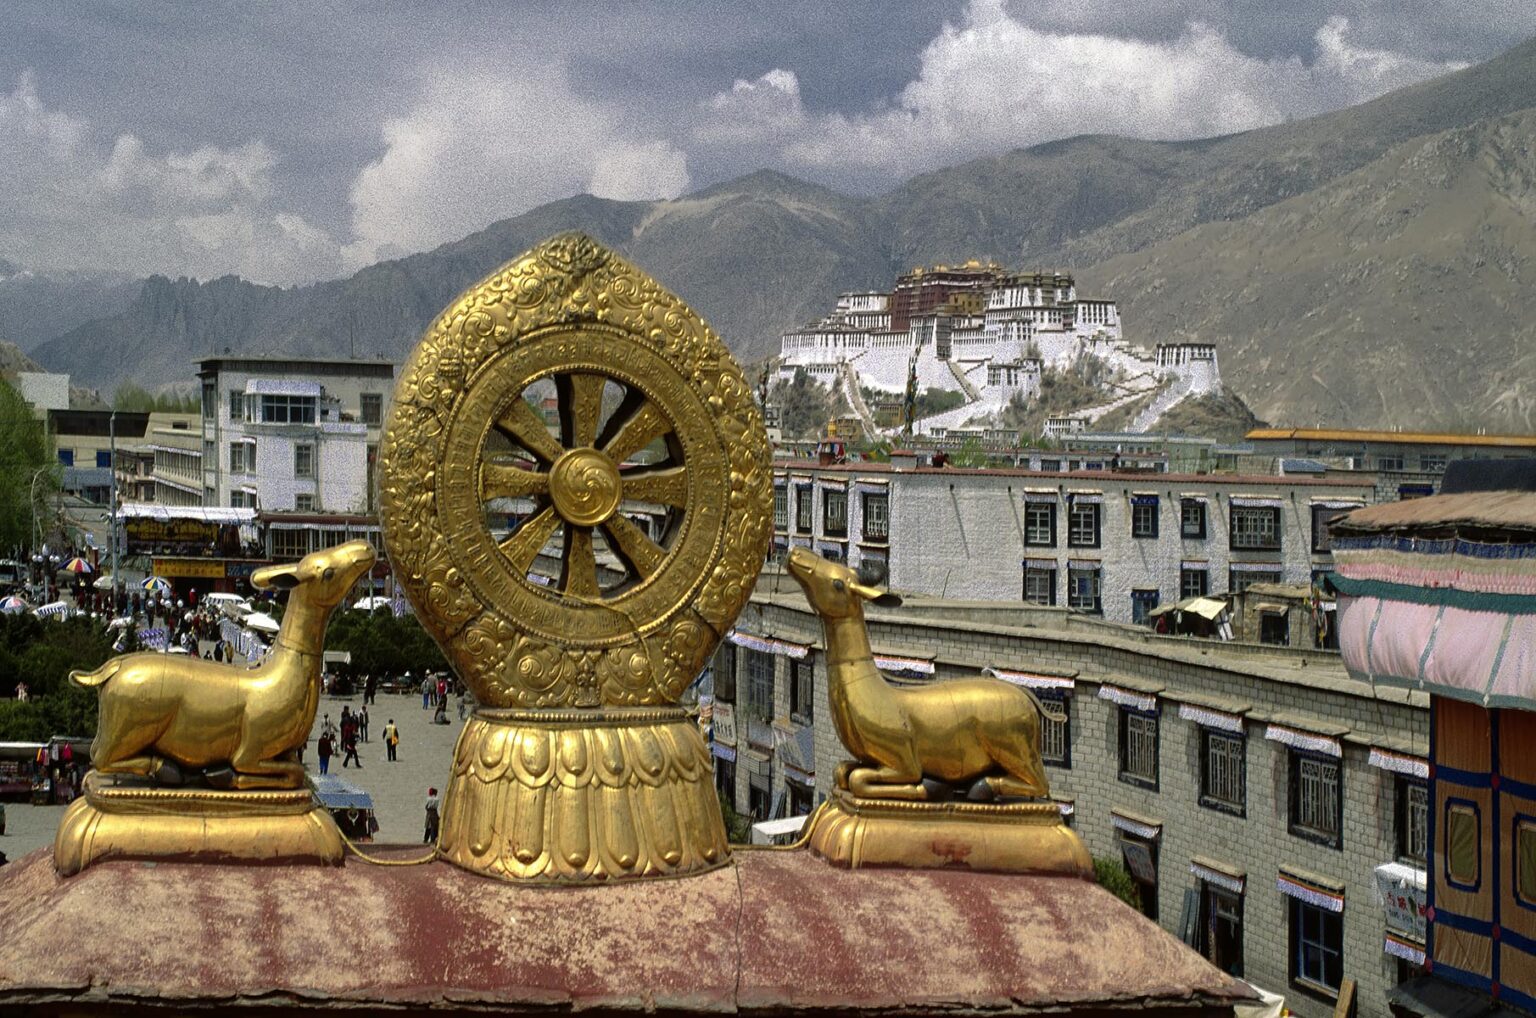 The POTALA is visible through the GOLDEN DHARMA WHEEL and DEER which adorn the roof of the JOKHANG - LHASA, TIBET